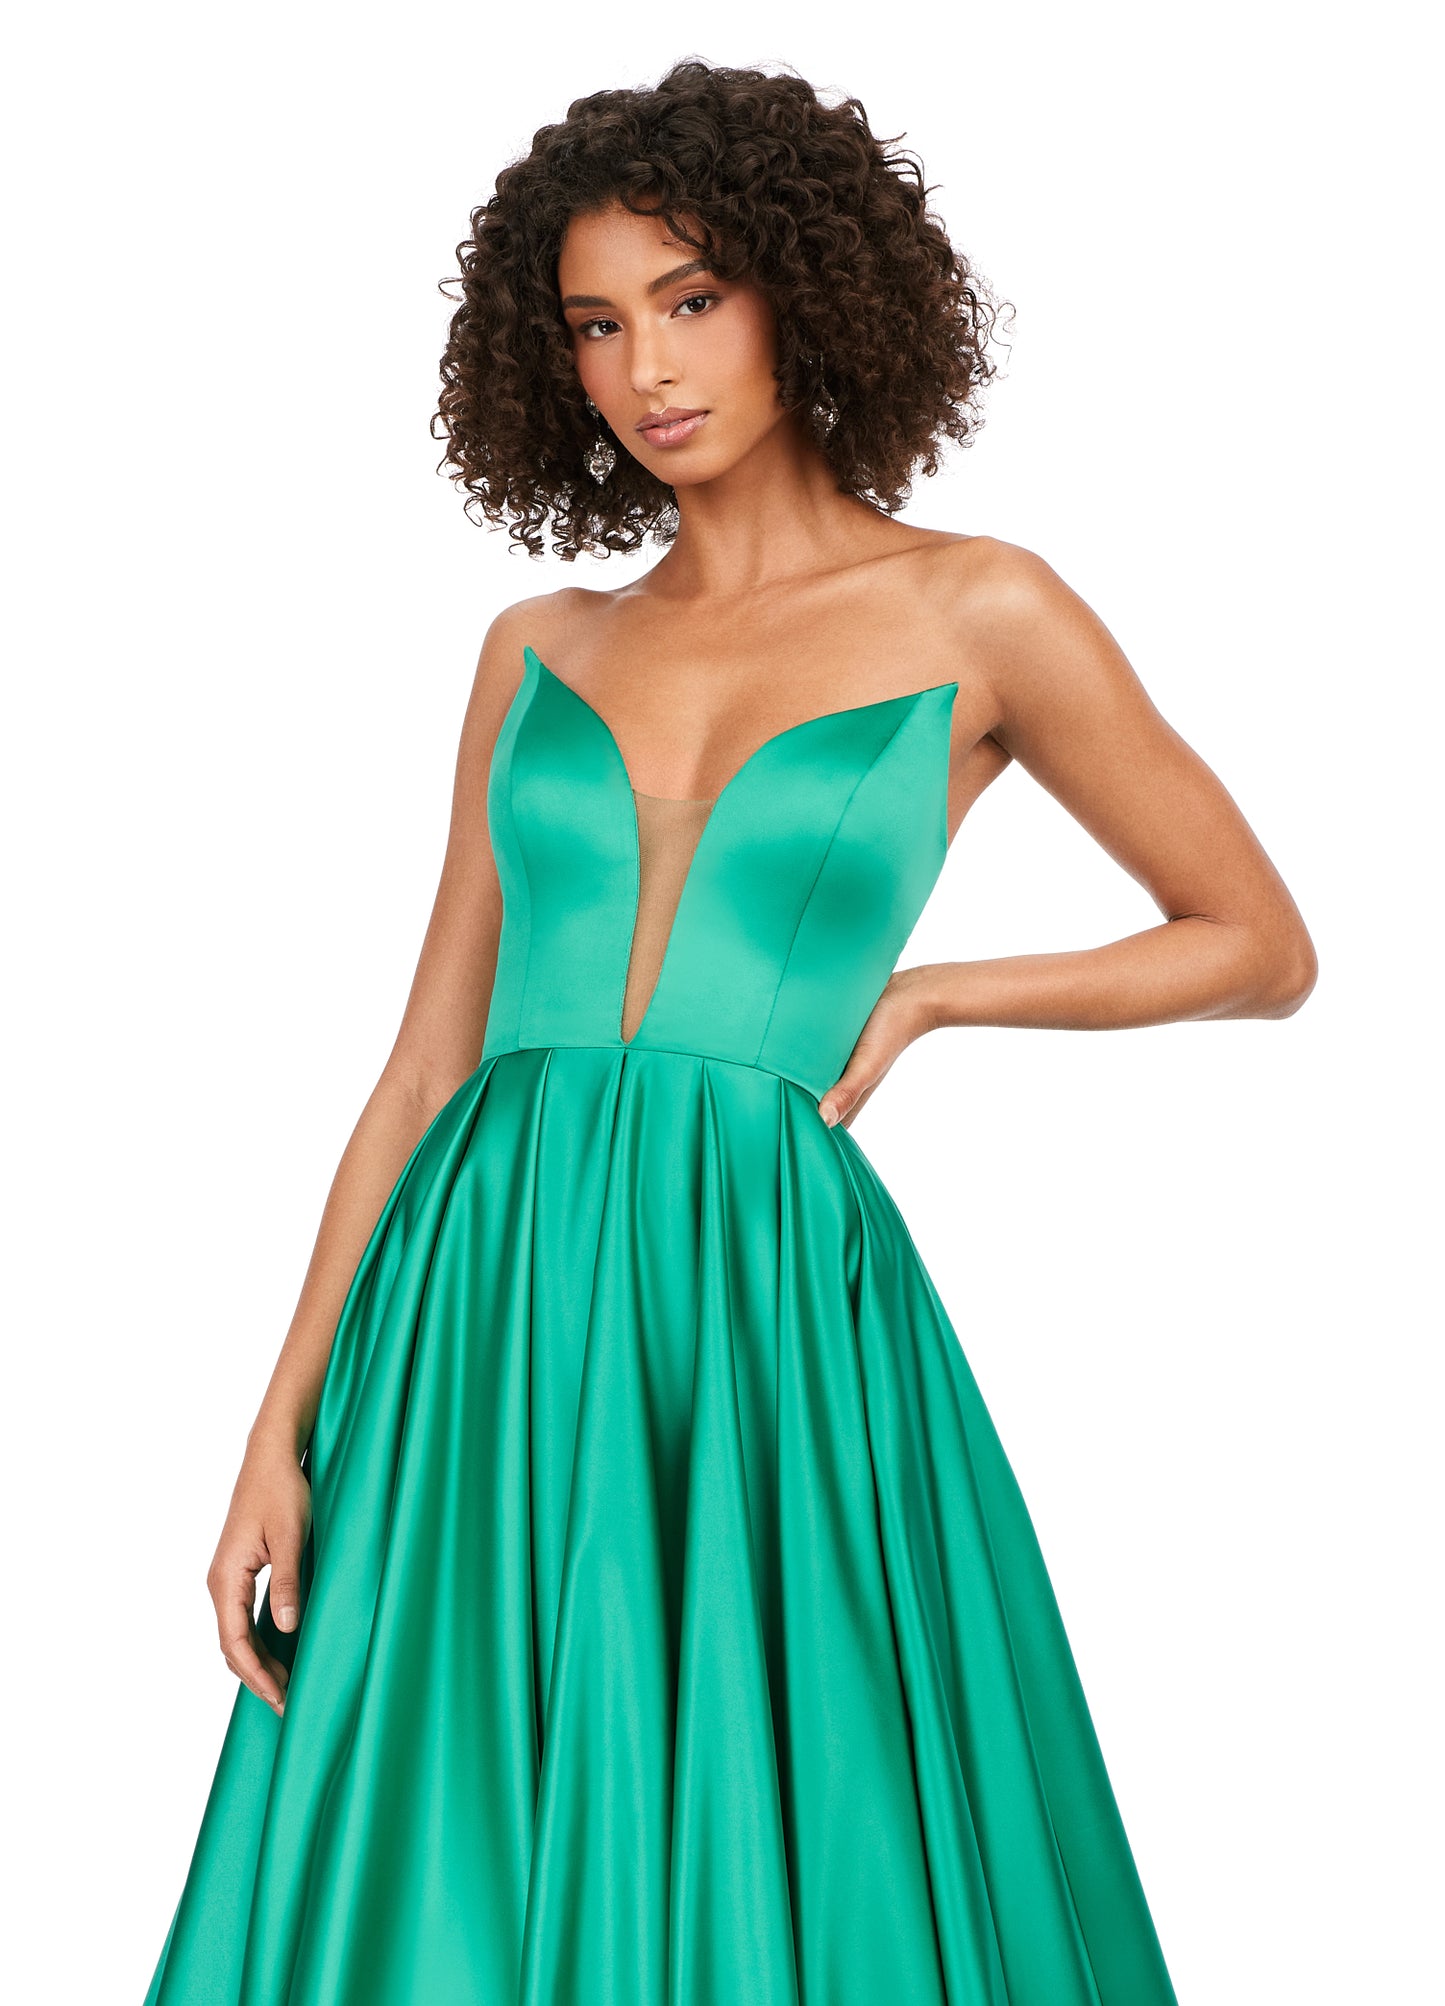 Ashley Lauren 11250 Strapless Plunging Neckline Heavy Satin A-Line Sweeping Train Ballgown Formal Dress. This satin ball gown features an elegant illusion v-neckline. The full A-Line skirt has pockets and a sweeping train.